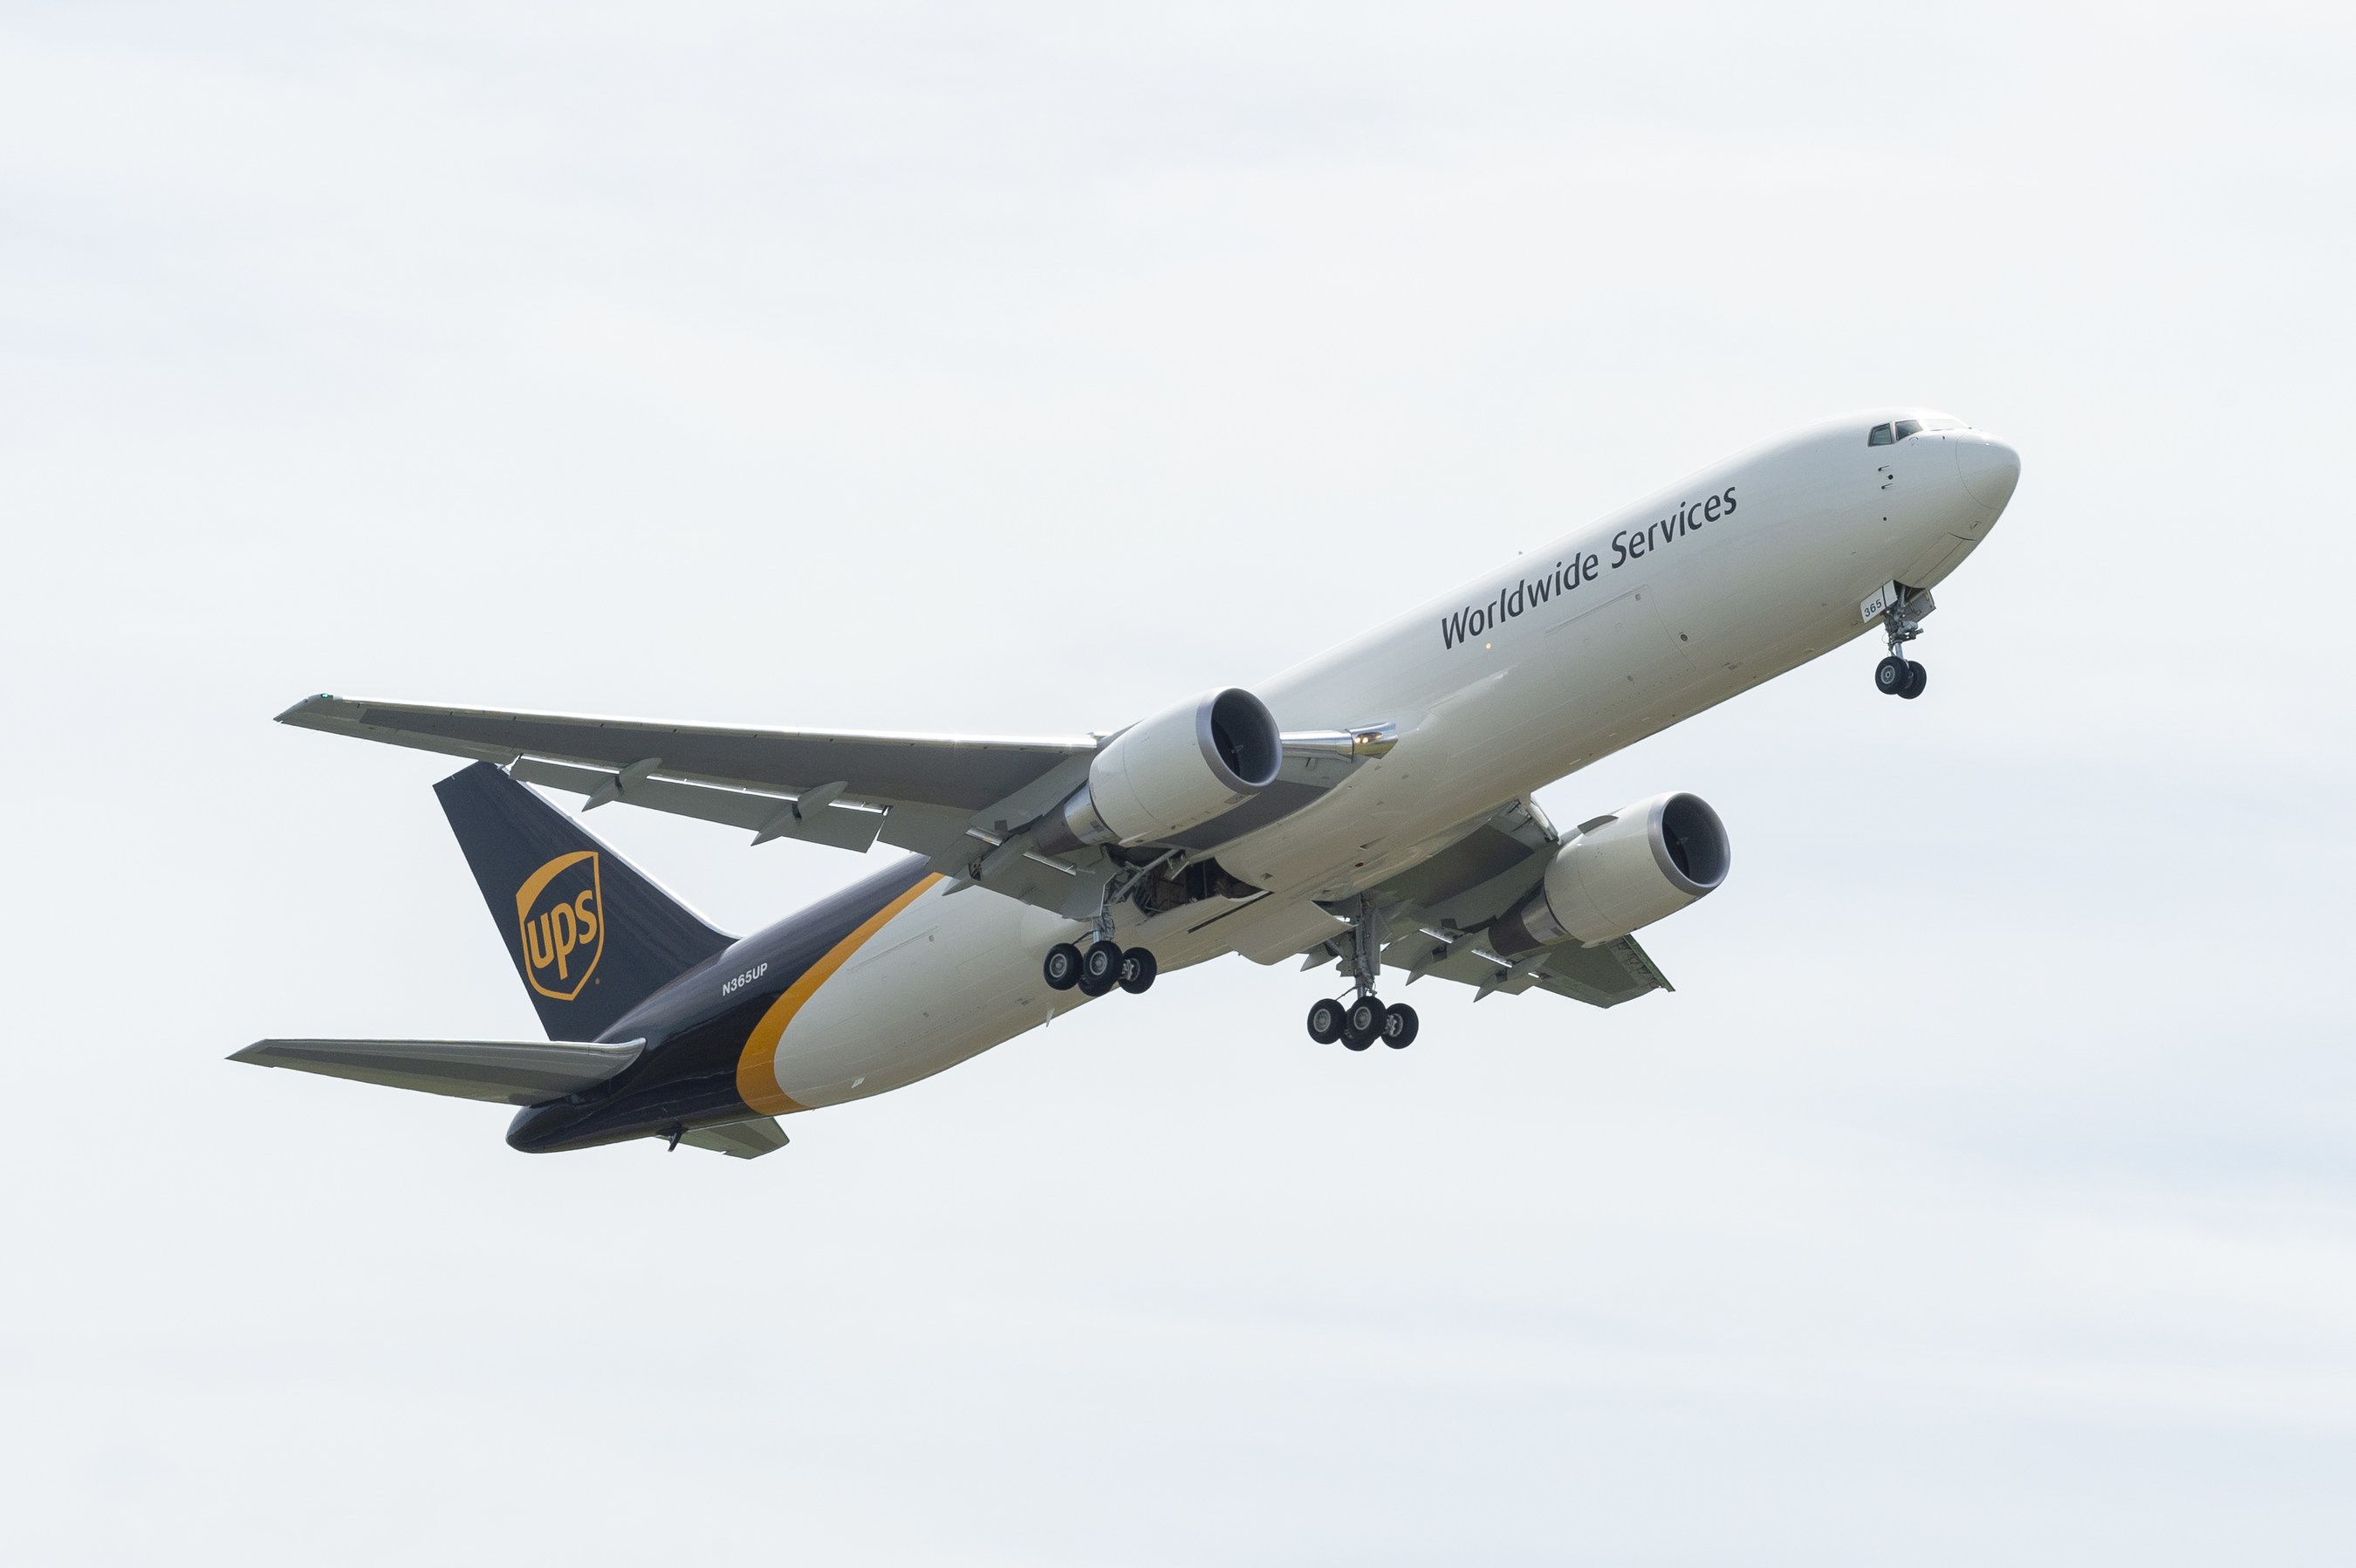 A UPS Boeing 767 taking off